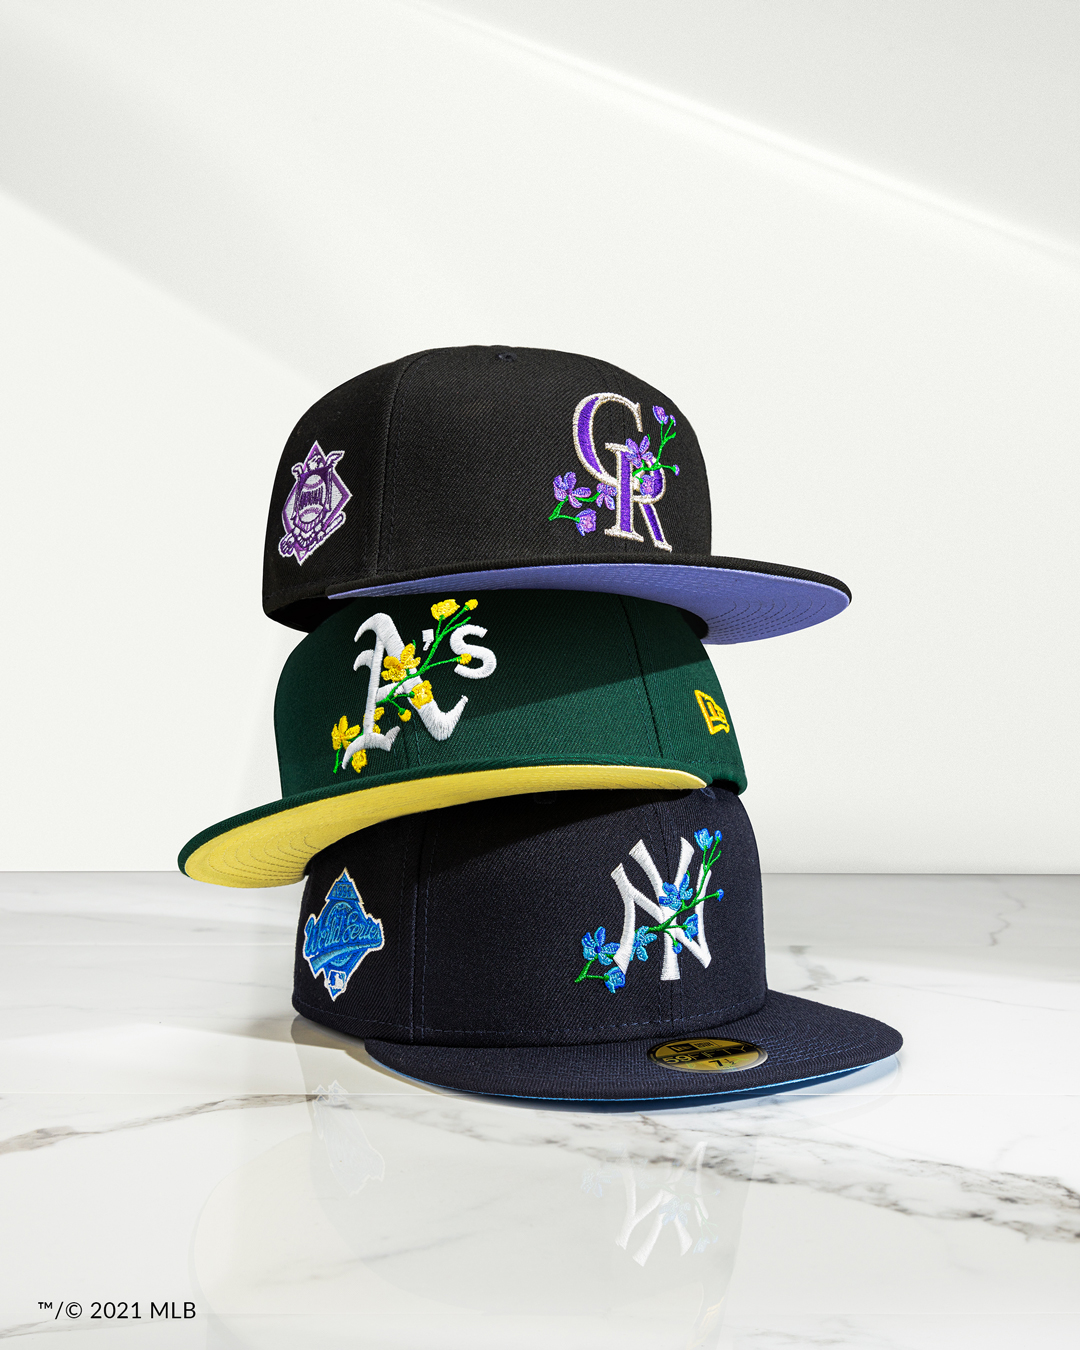 MLB SIDE PATCH BLOOM 59FIFTY HATS now available from @neweracap